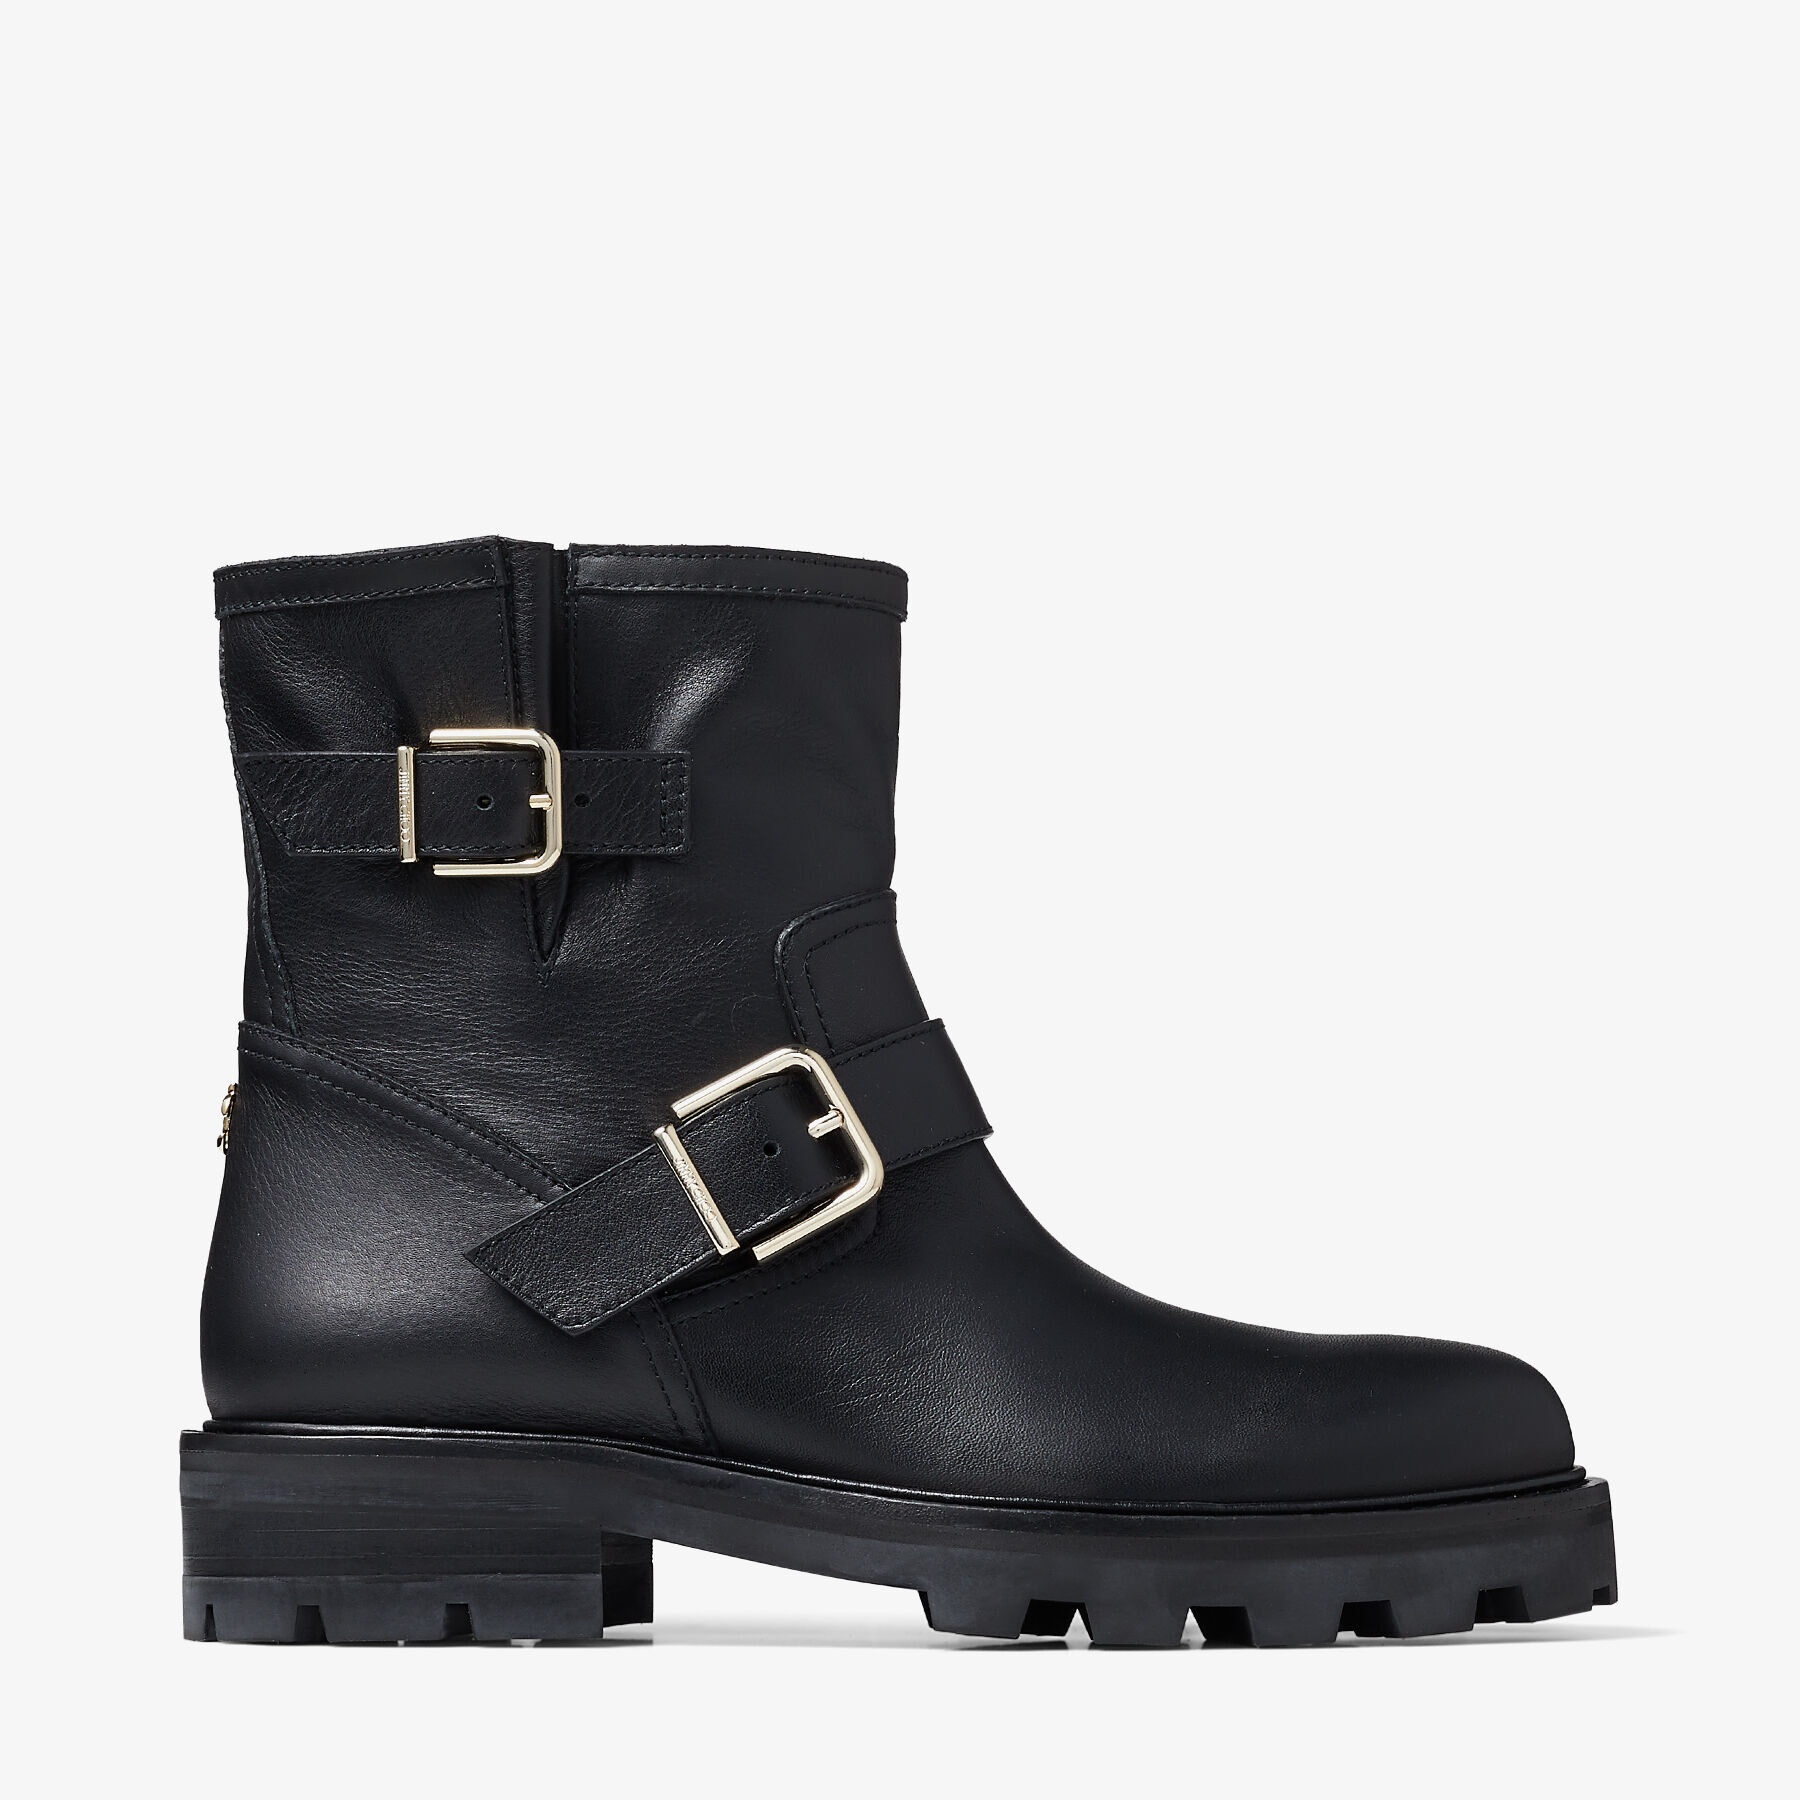 Youth II
Black Smooth Leather Biker Boots with Gold Buckles - 1